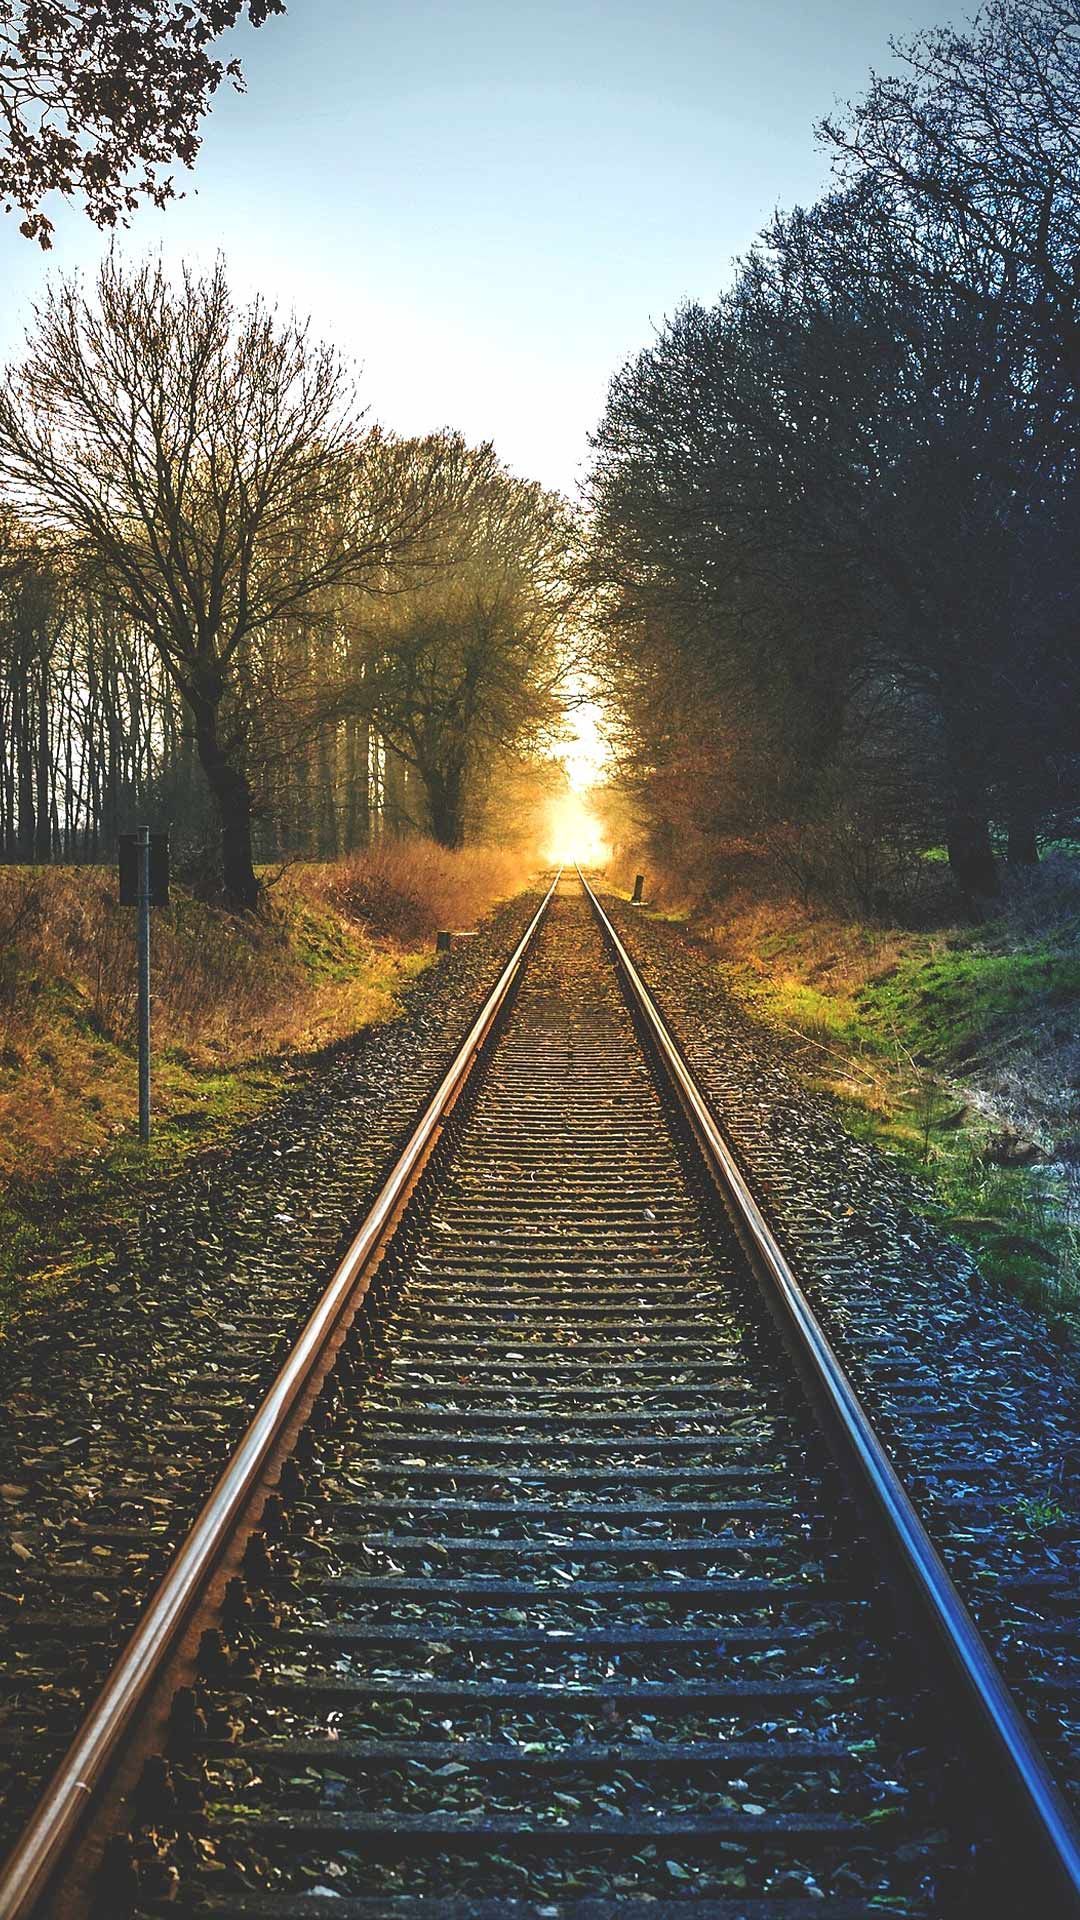 Train track travel wallpaper full HD phone background for iPhone & android lock screen. HD phone background, Landscape photography nature, Travel wallpaper